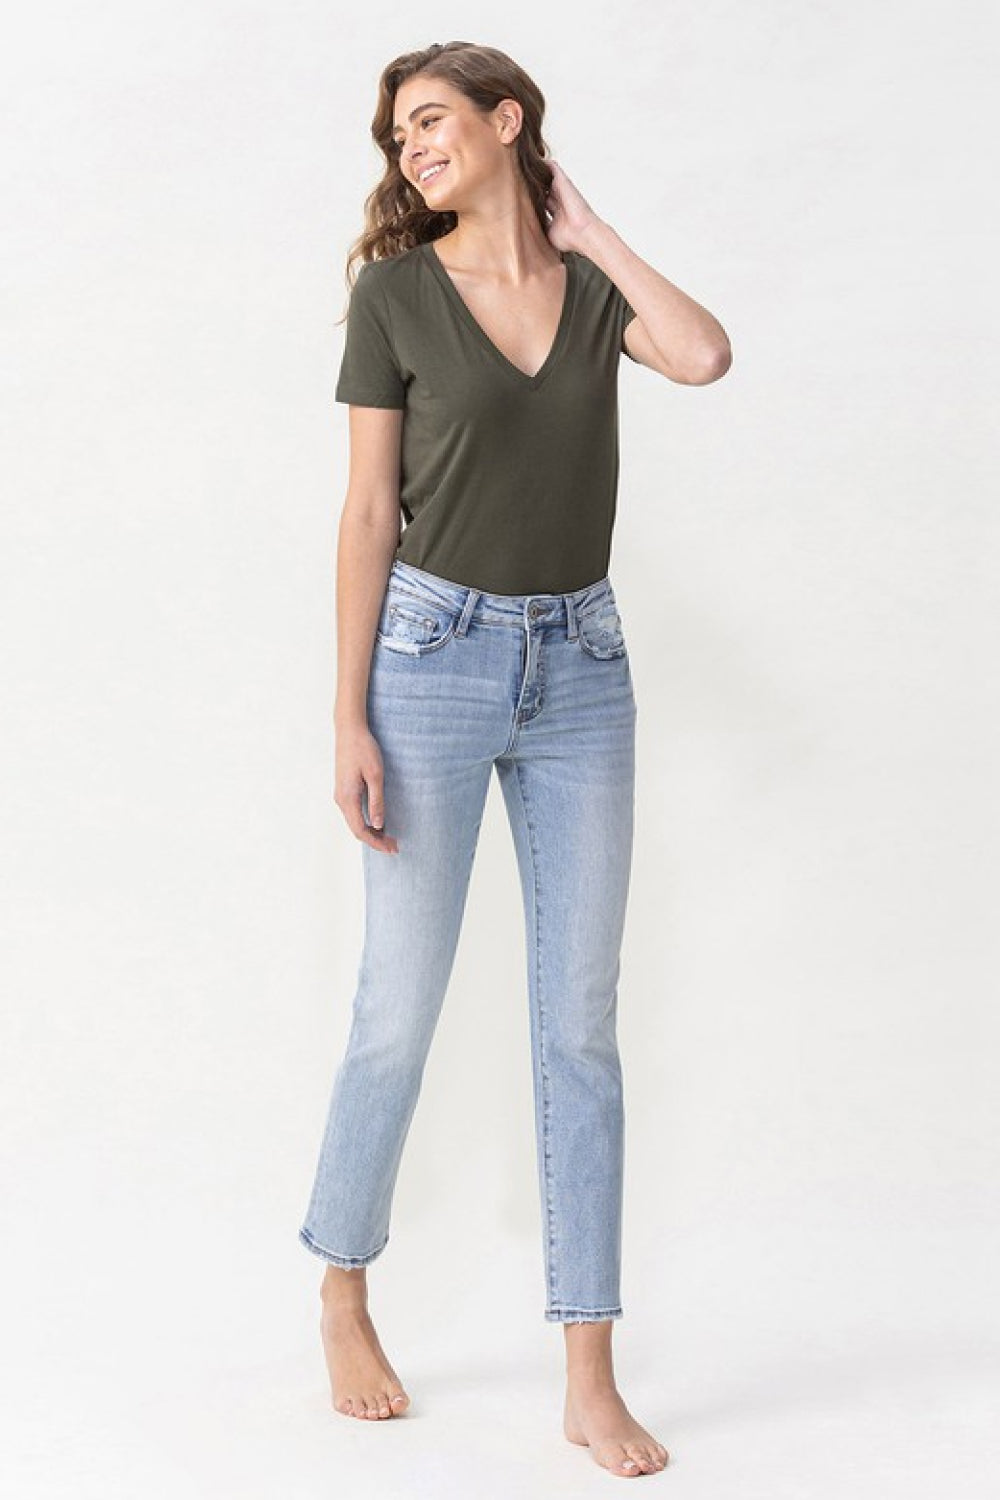 Lovervet Andrea Midrise Crop Straight Jeans - Online Only